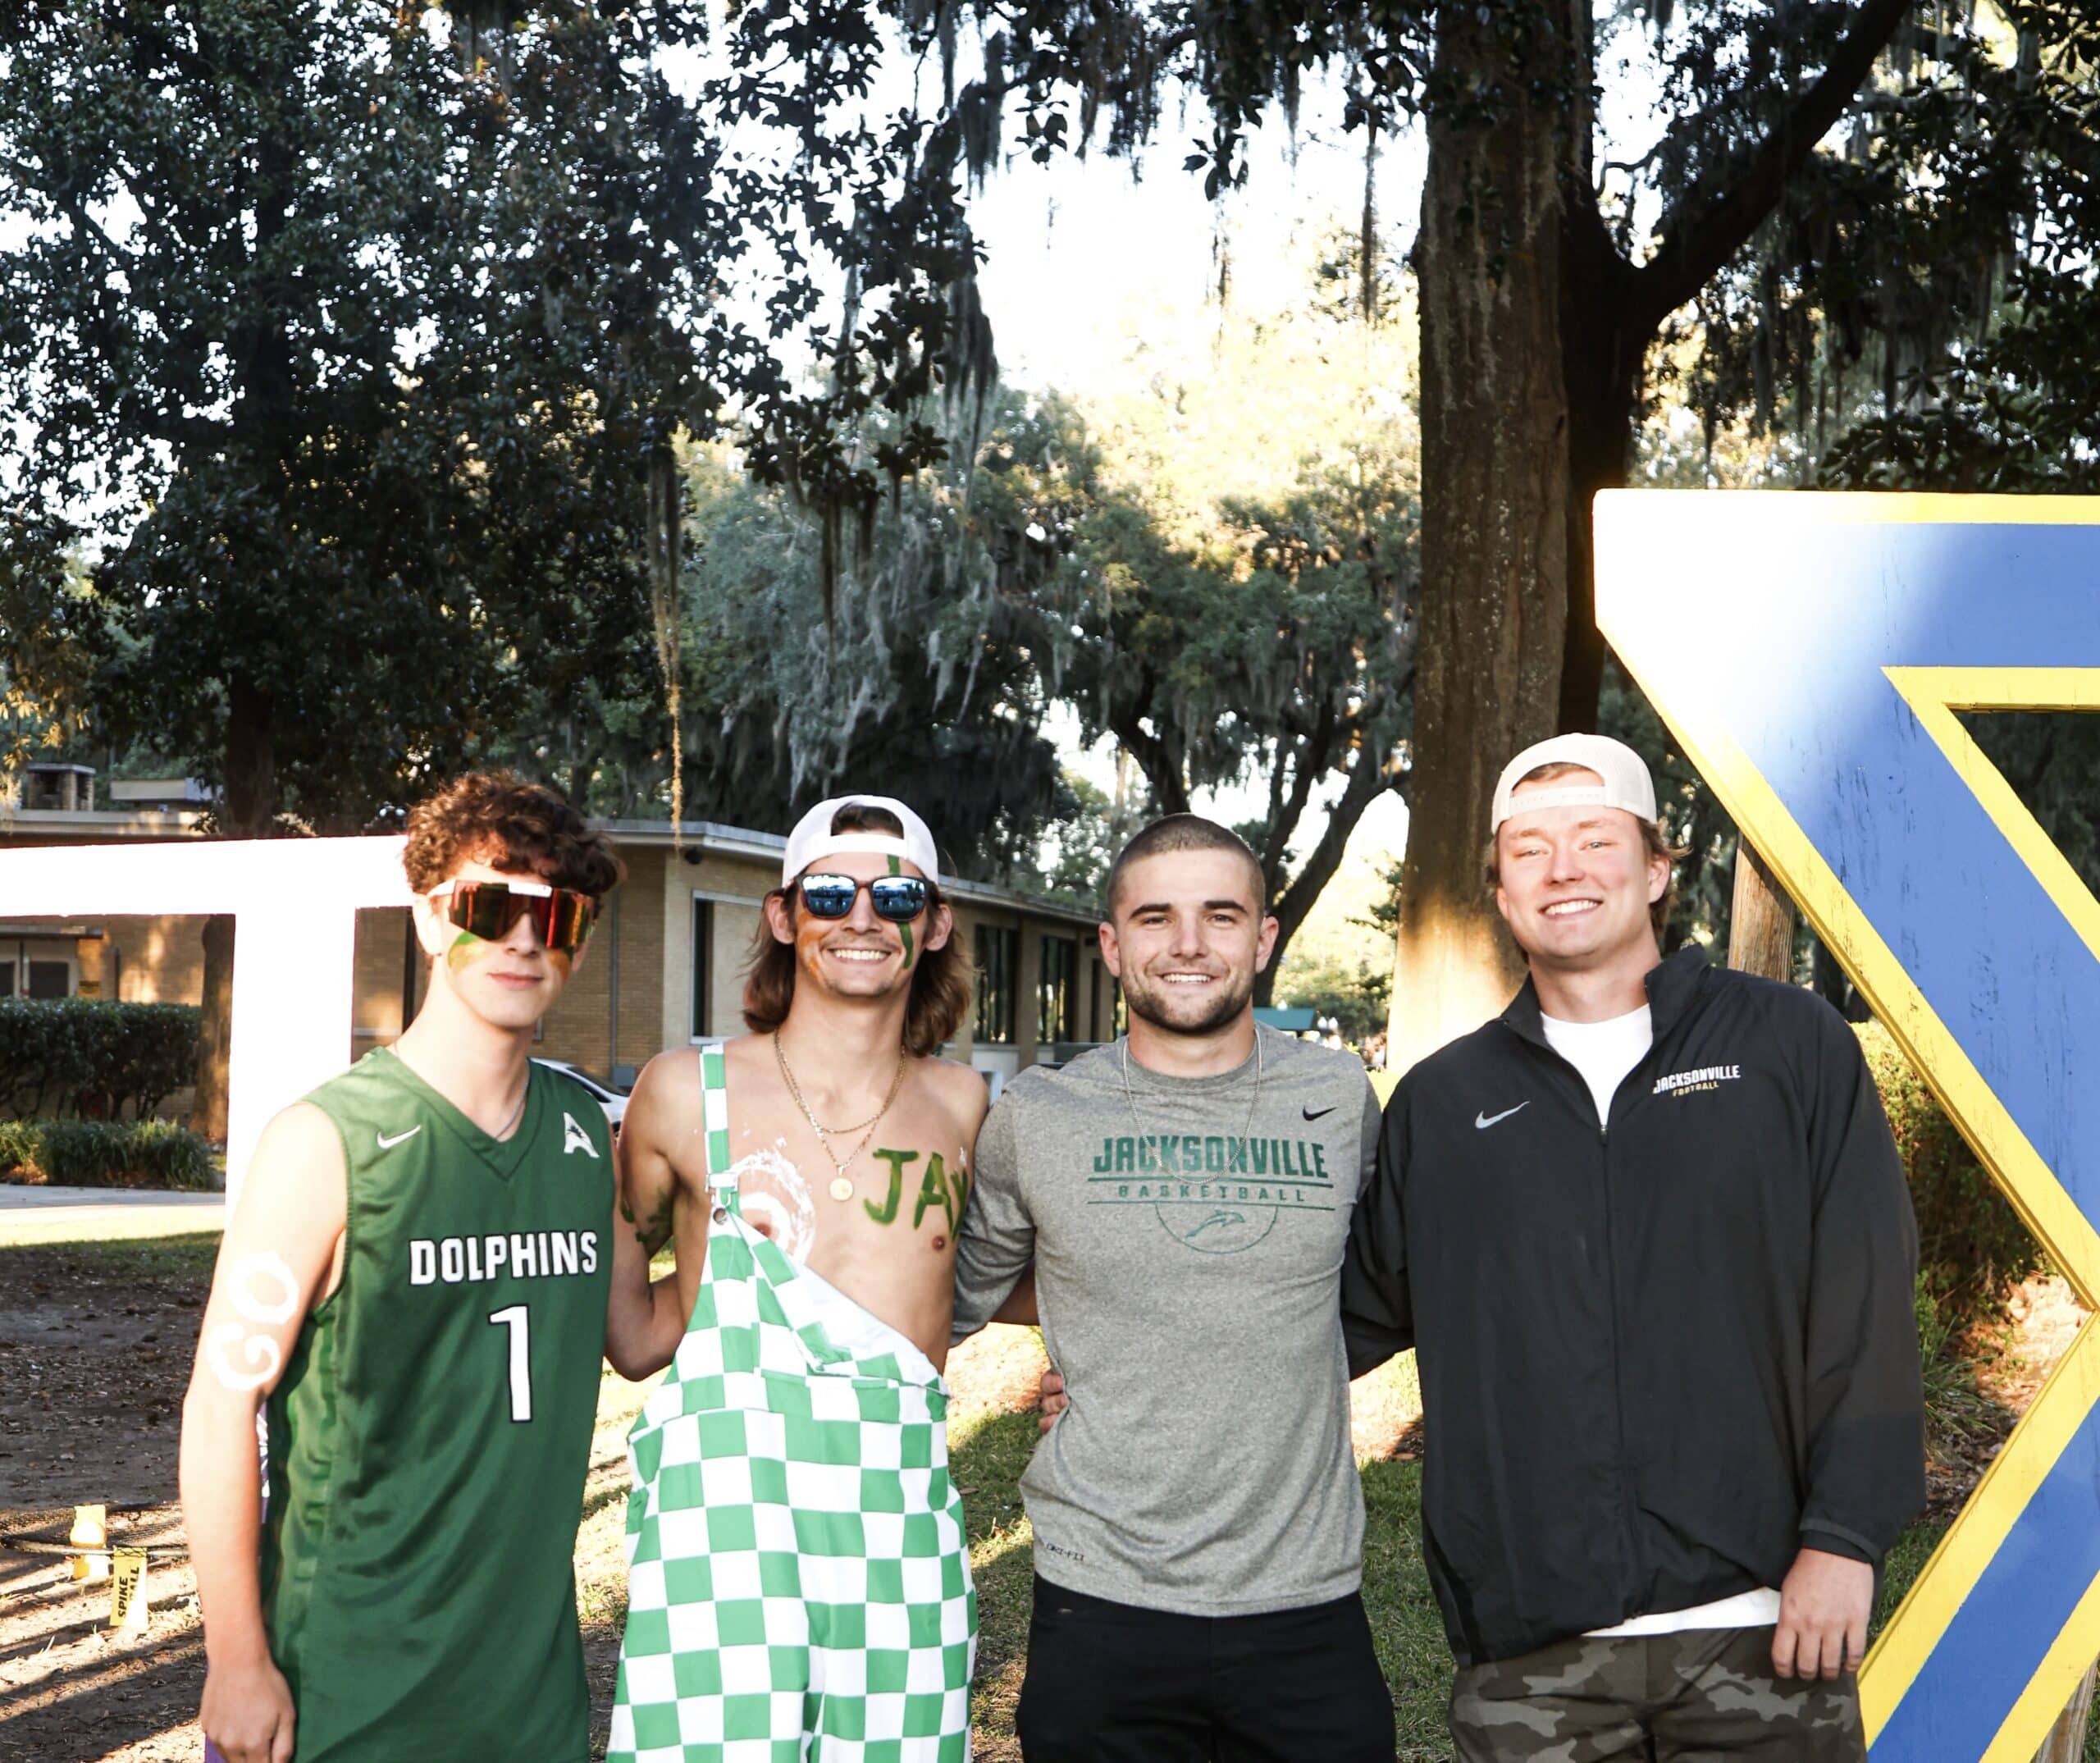 Jacksonville University Phinatics student section leaders pose for a photo at the pre-game tailgate